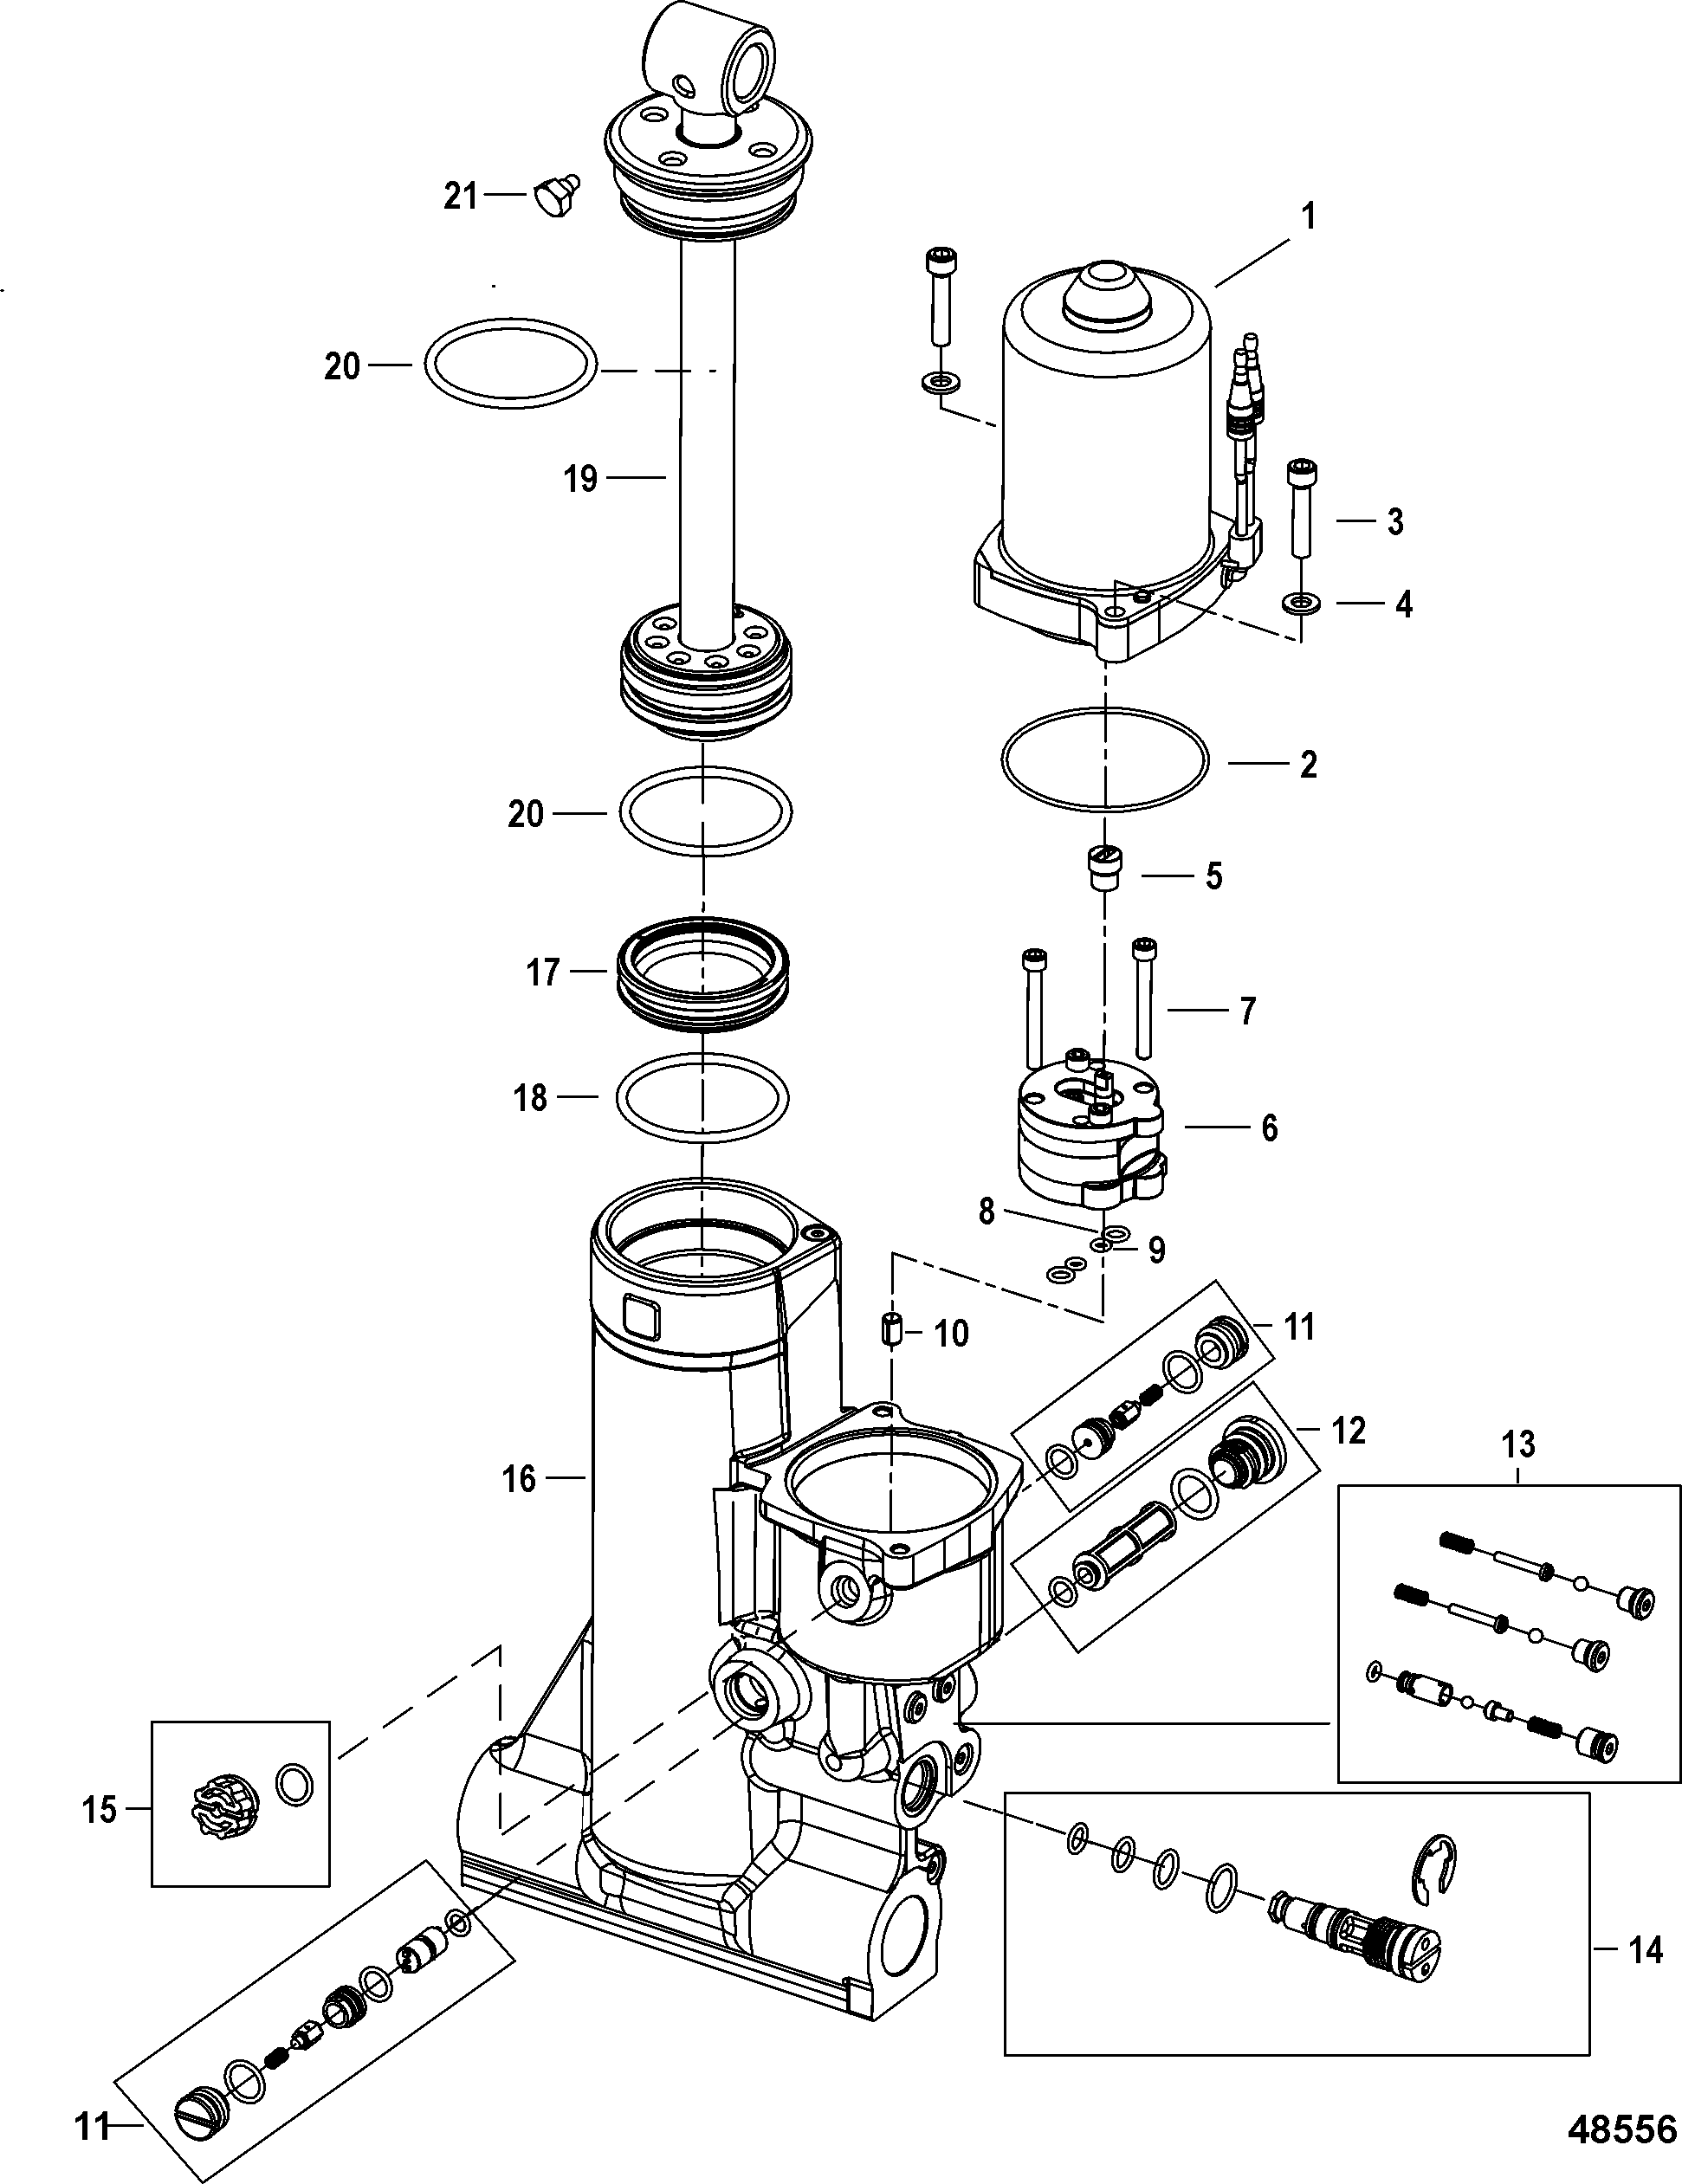 Power Trim Assembly, Components